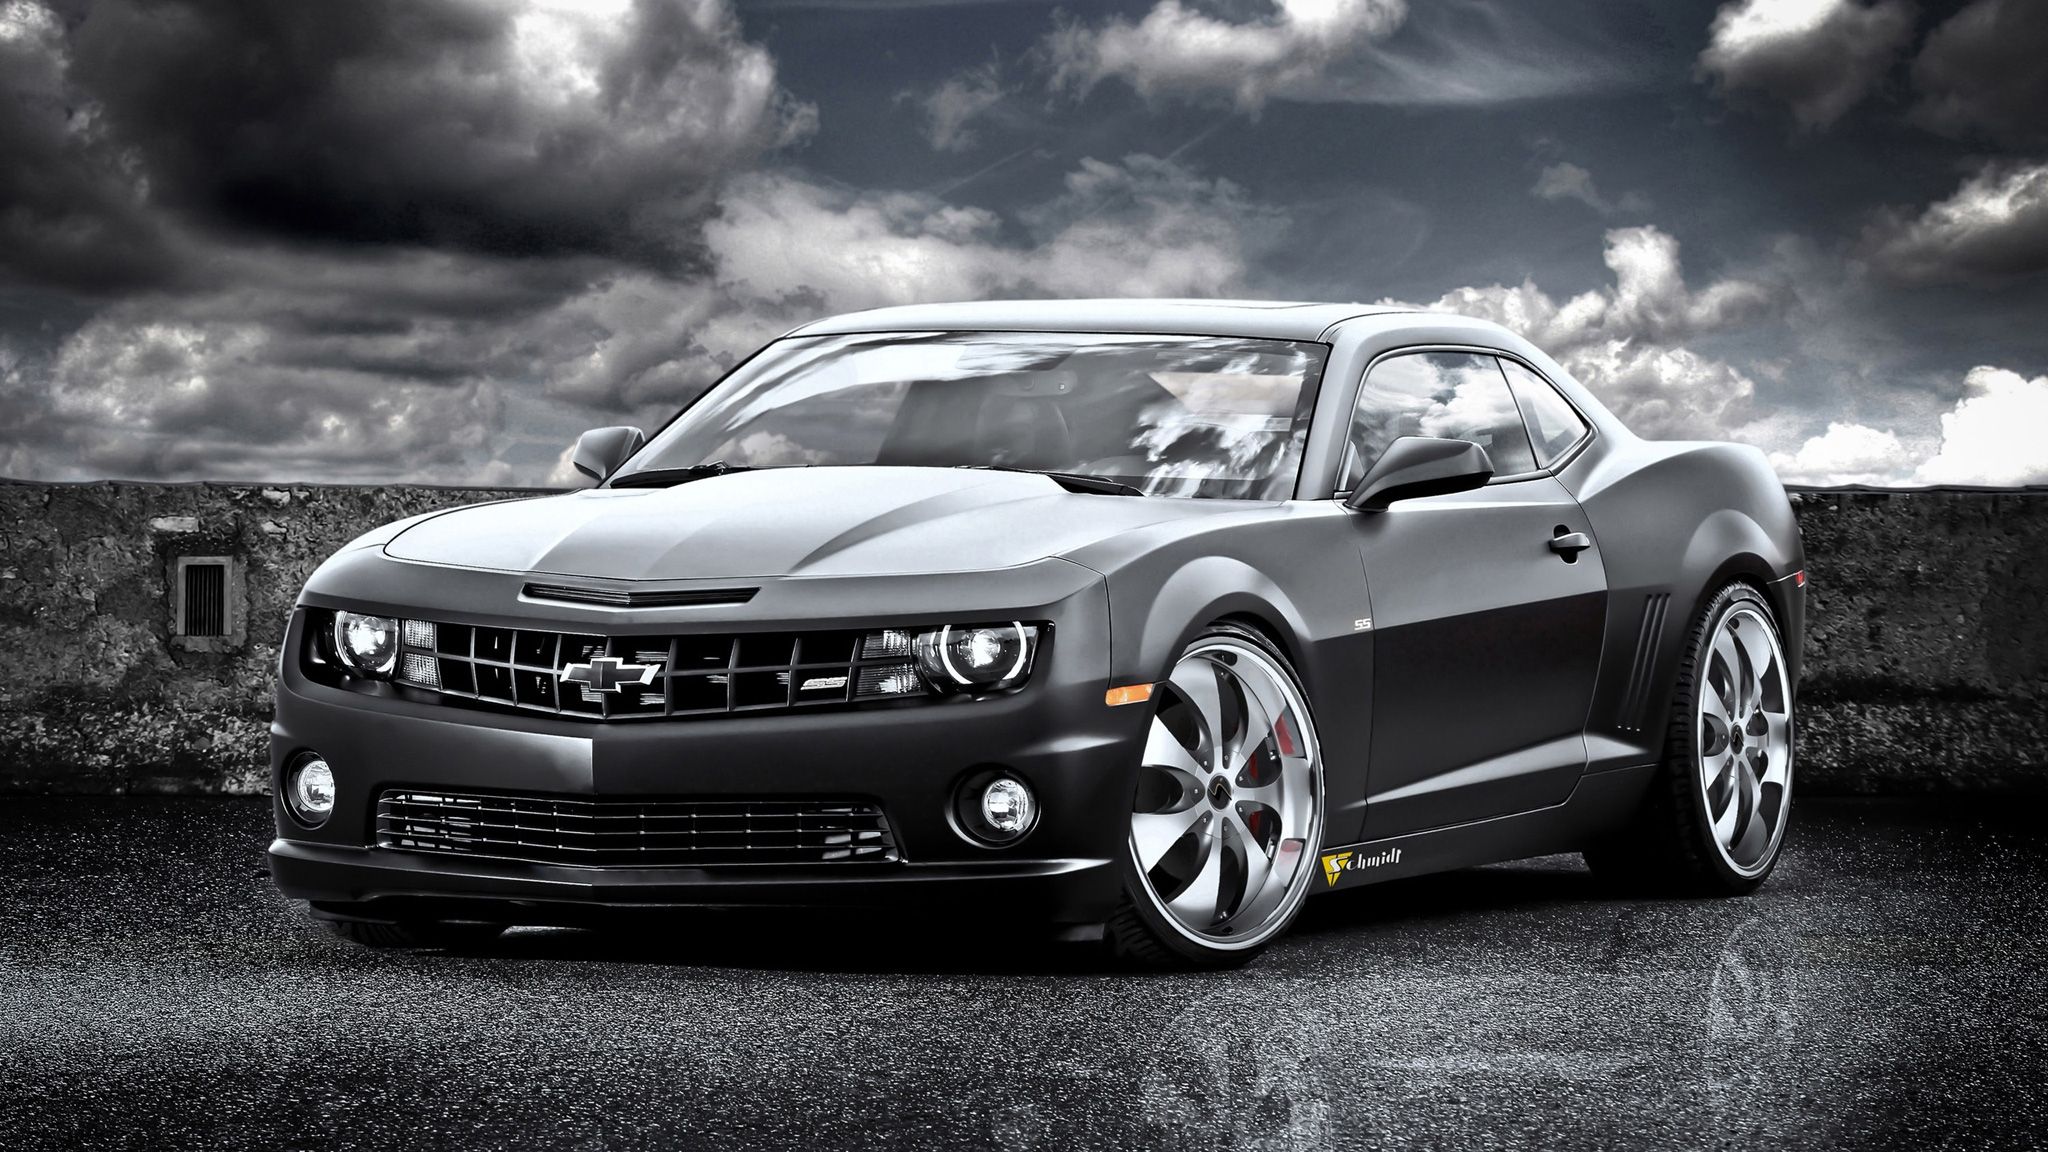 Chevrolet Camaro SS wallpaper for free download in HD resolution